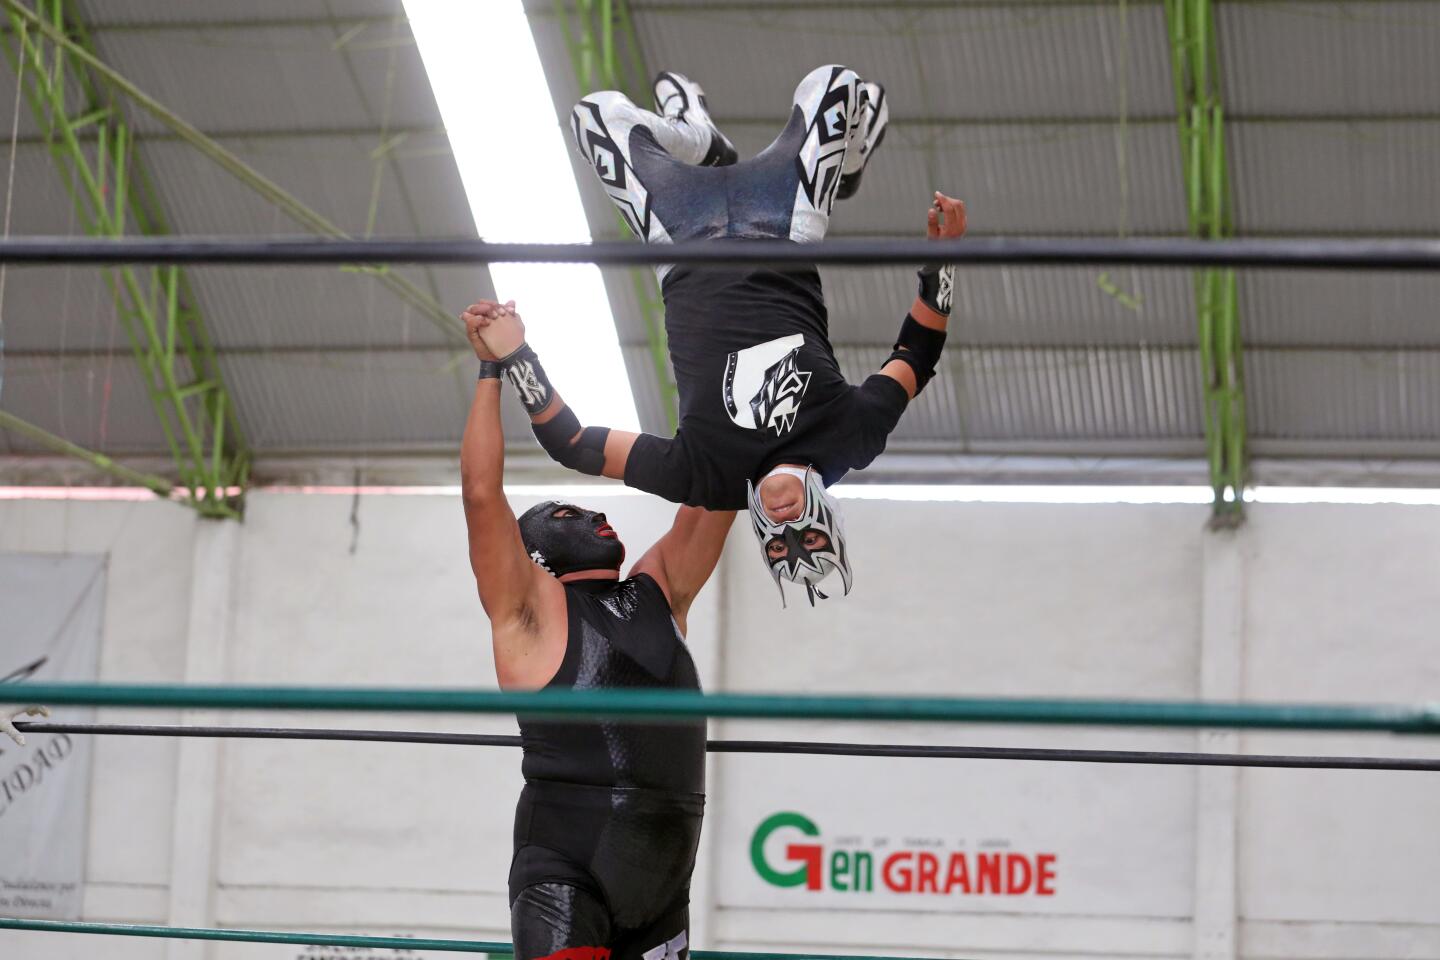 Wrestler Mr. Jack flips Krauzar in the air at a lucha libre event that was broadcast online.